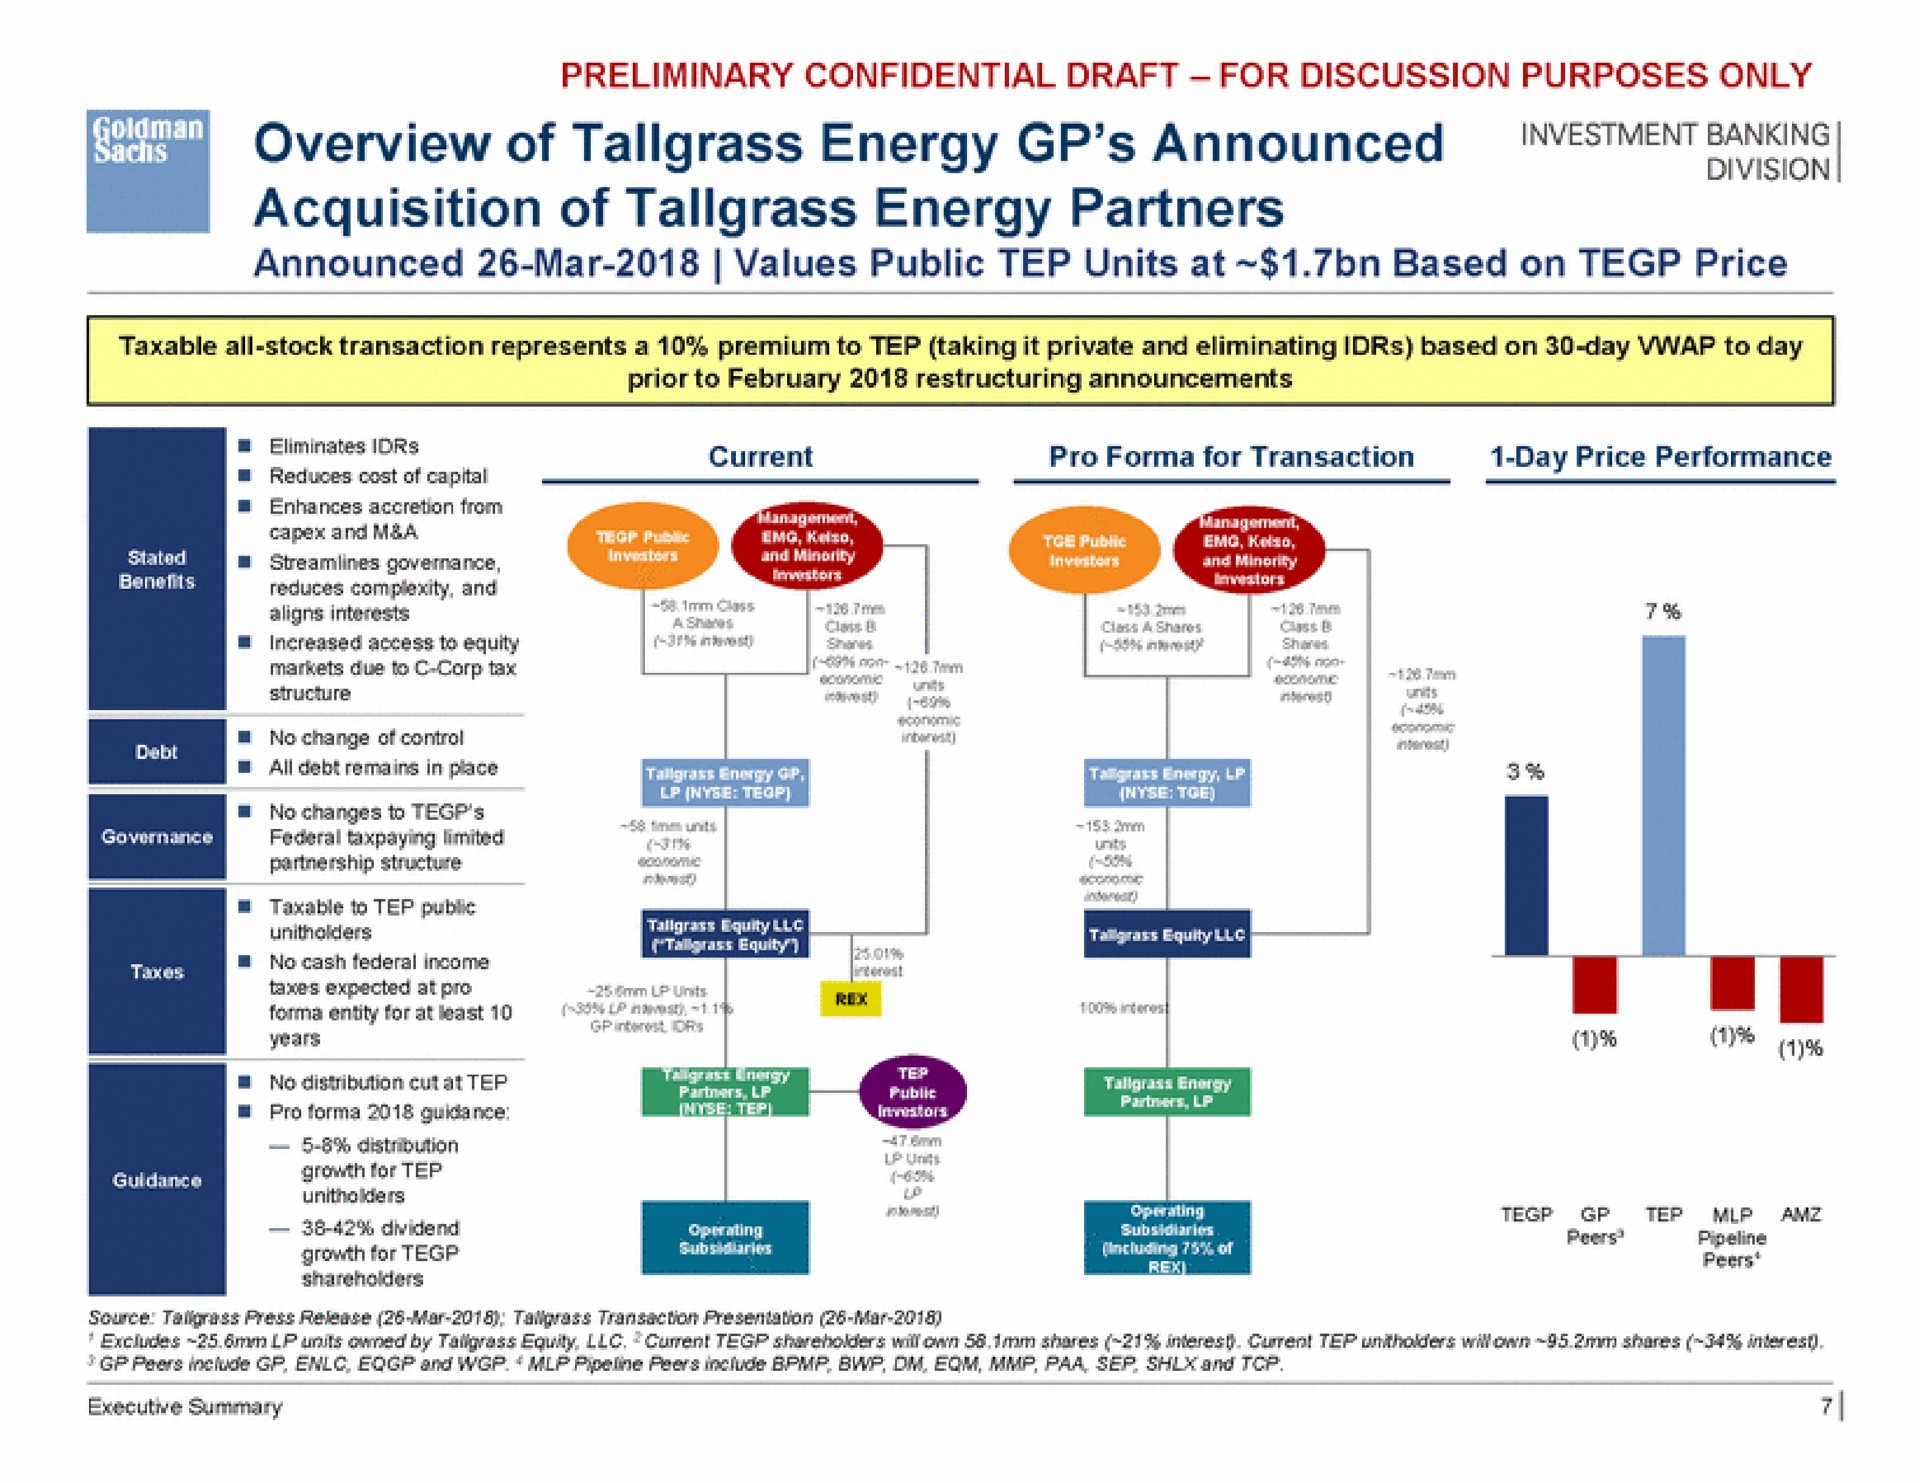 overview of energy announced banking acquisition of energy partners | Goldman Sachs